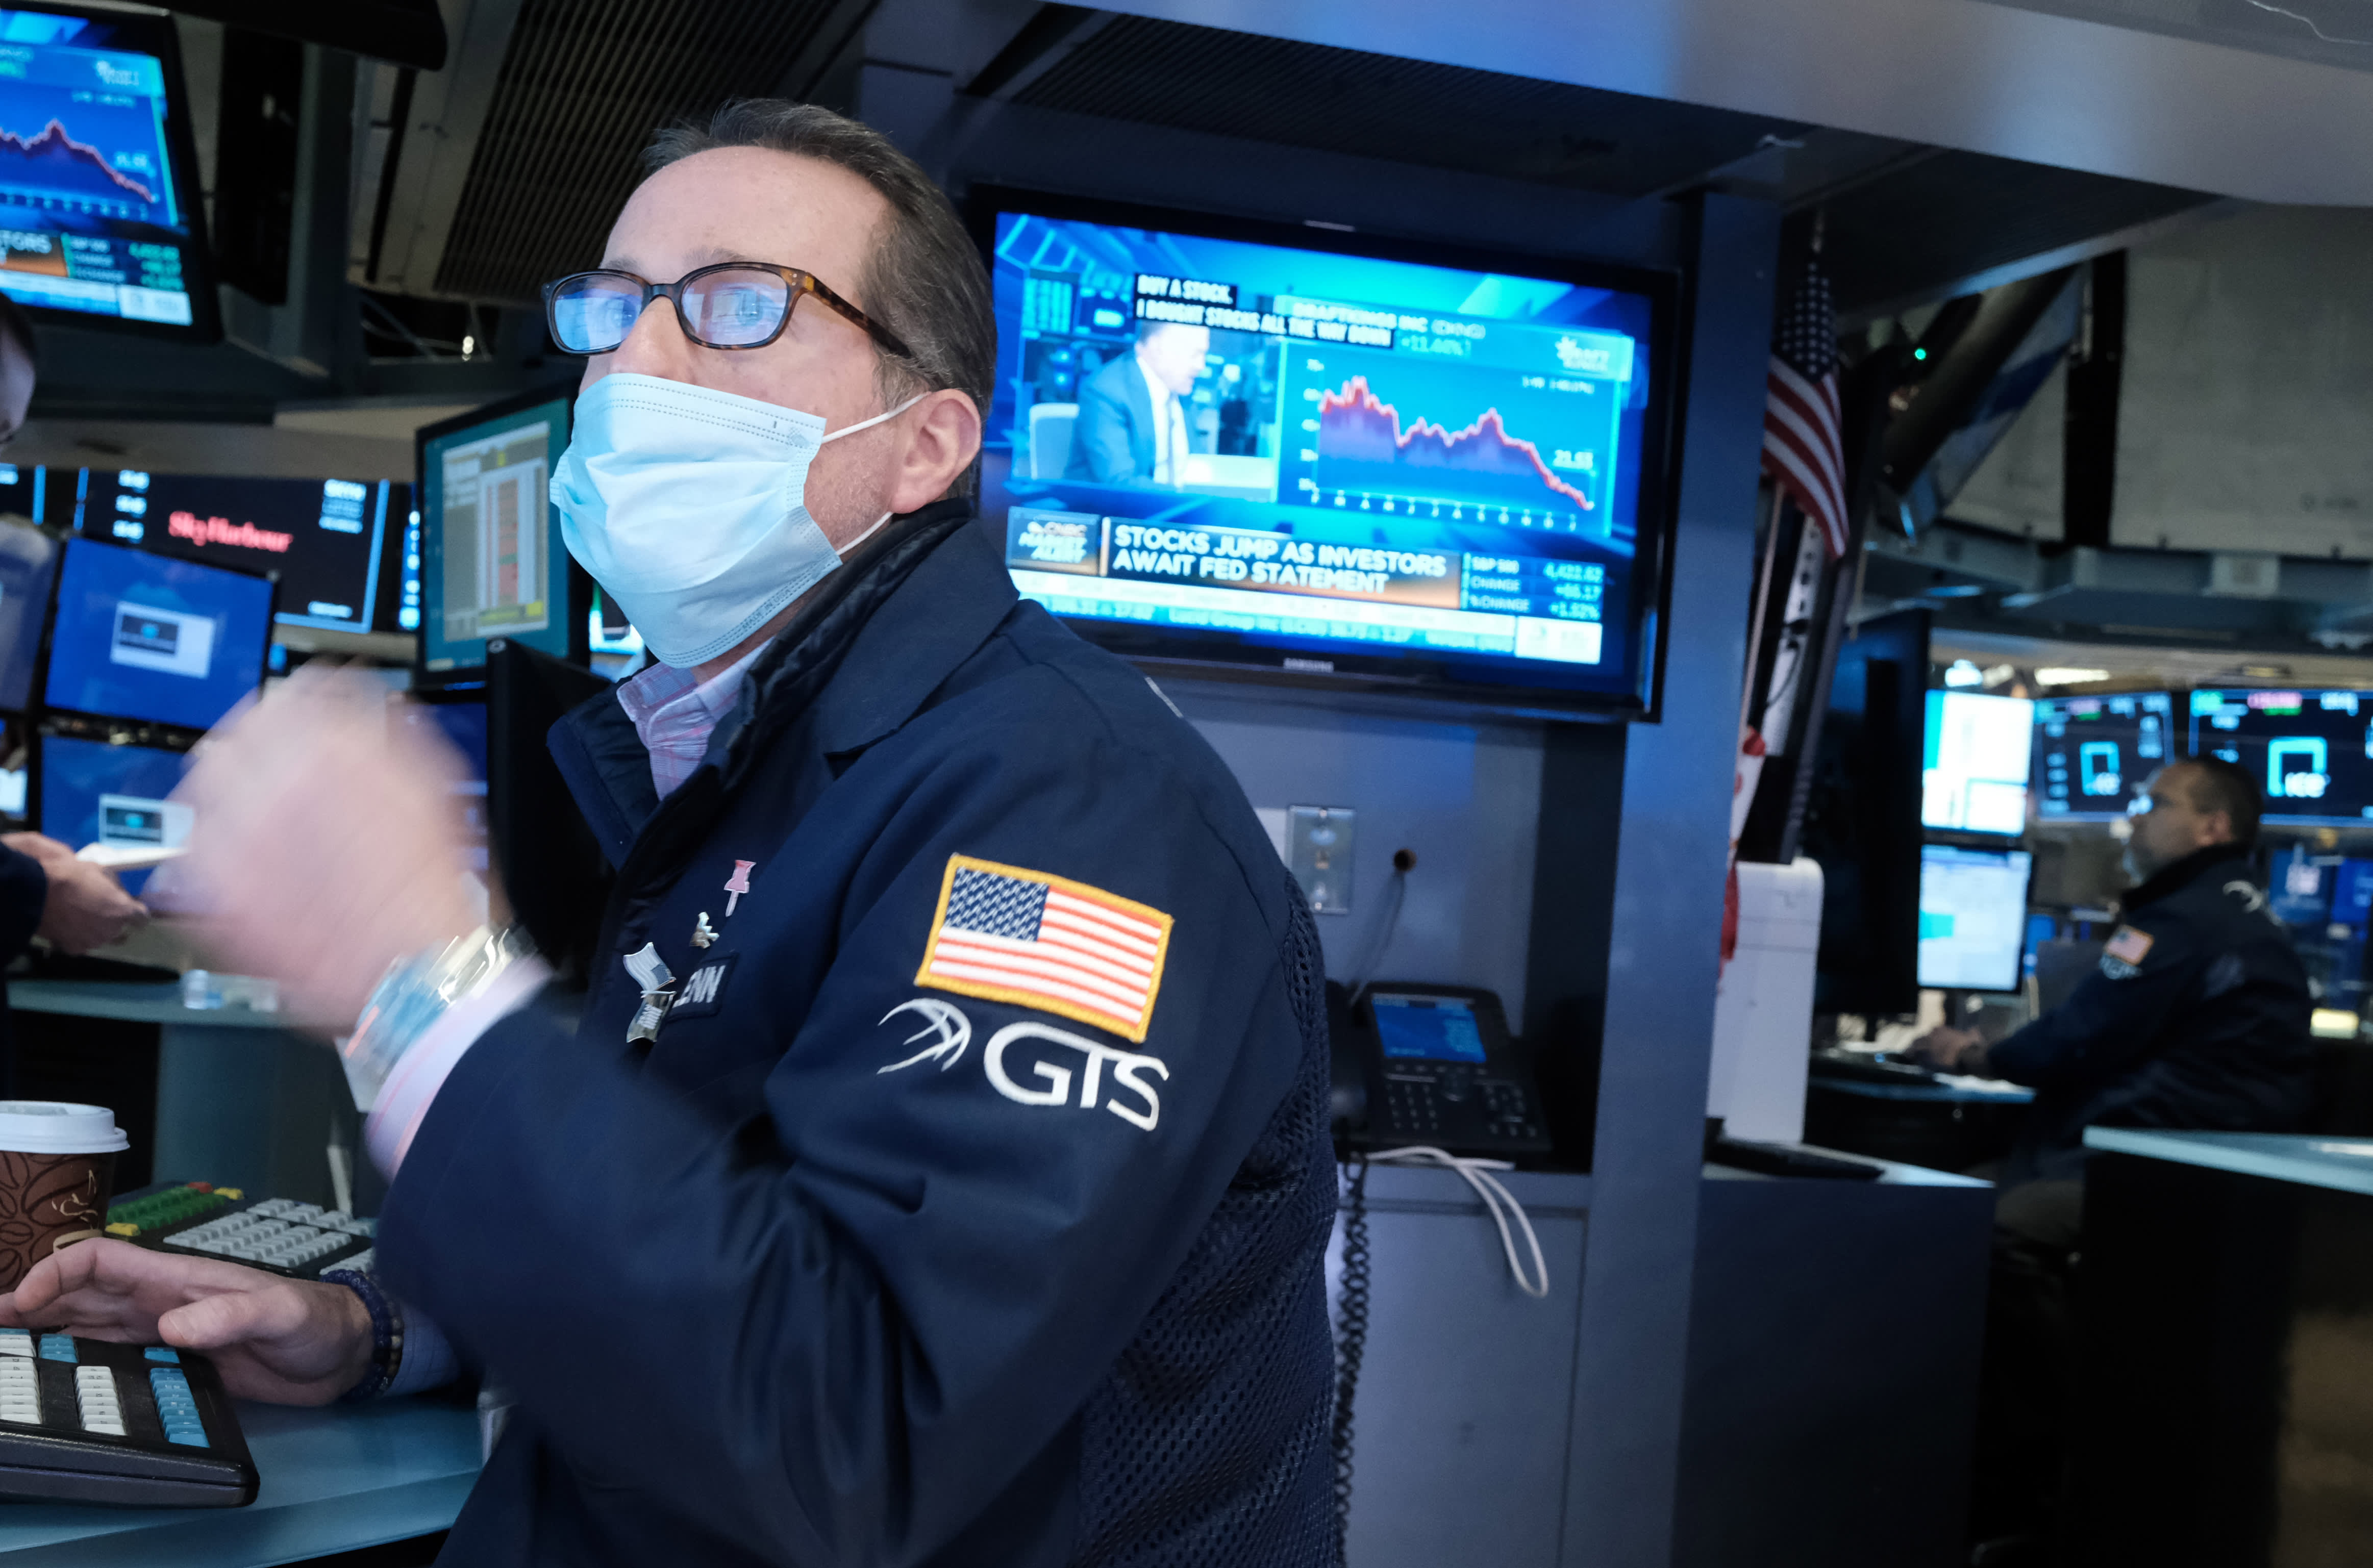 Dow falls as investors grapple with Fed's plans for rate hikes, Russia-Ukraine tensions